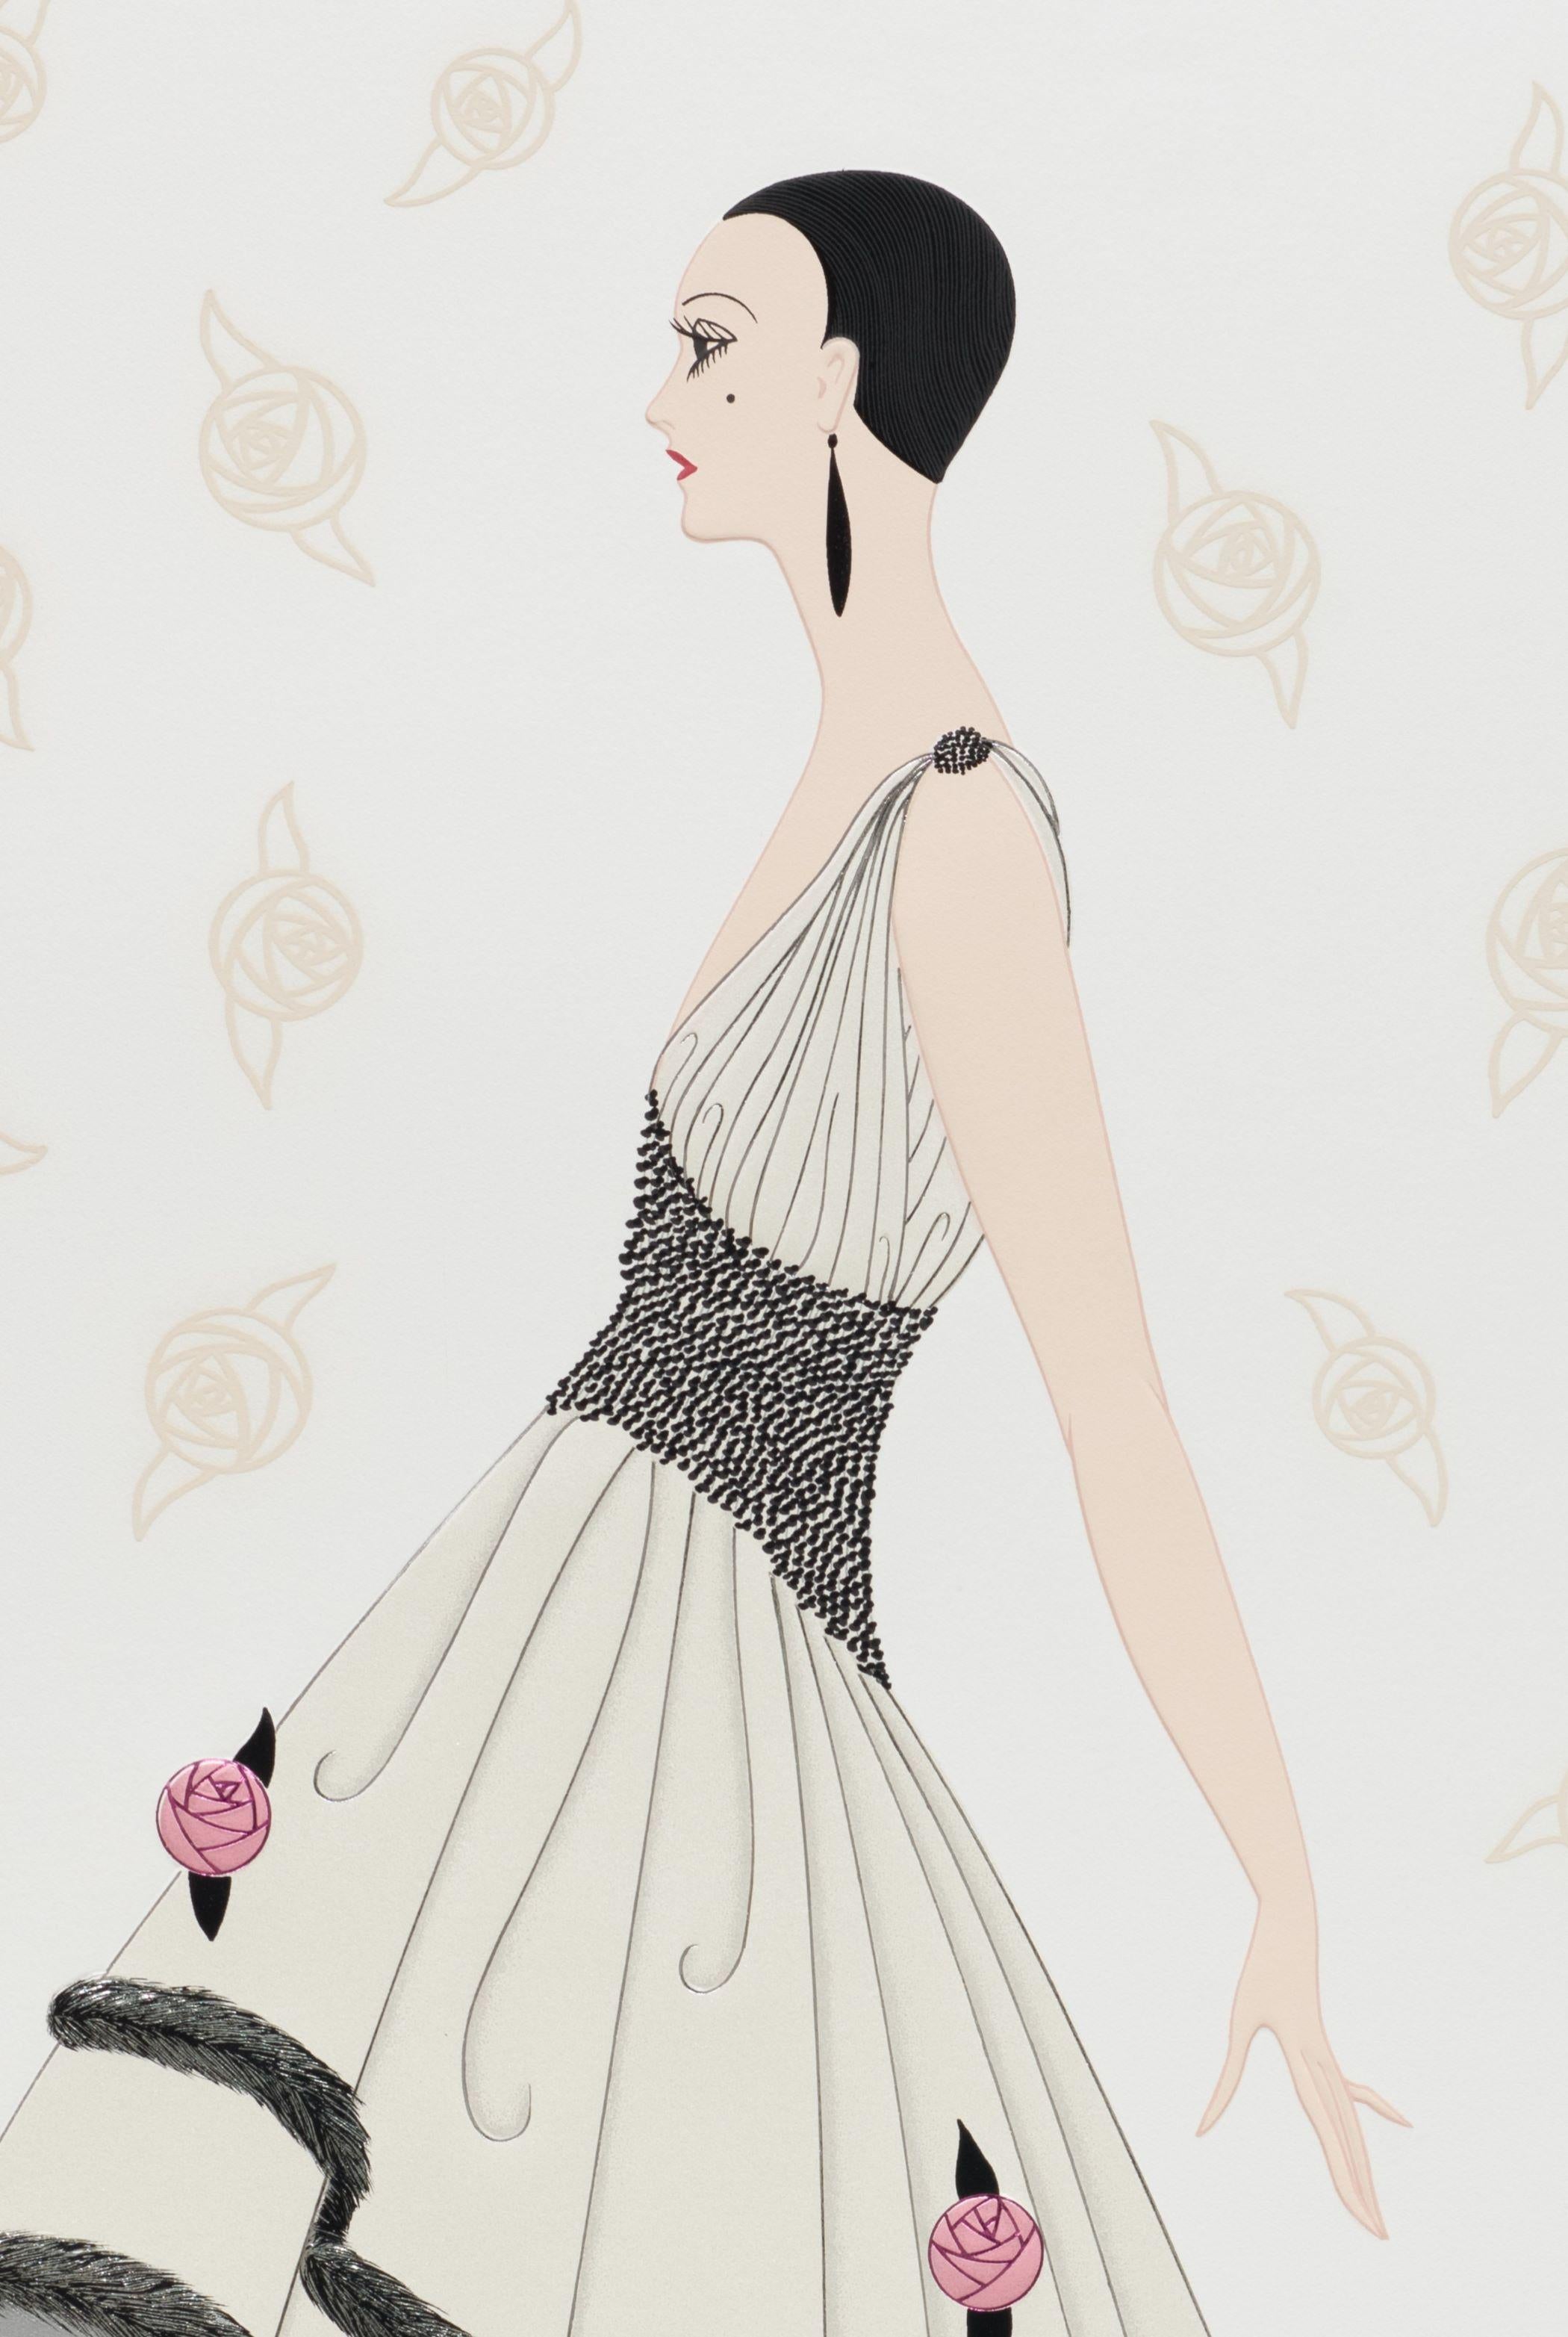 Rose Gown is an expertly crafted, embossed serigraph on paper with foil stamping and an image size of 30 x 23 inches. From the edition of 690, the art is numbered 294/300 and signed 'Erté' lower right (there were also 300 Roman, 60 AP, 5 PP, and 25